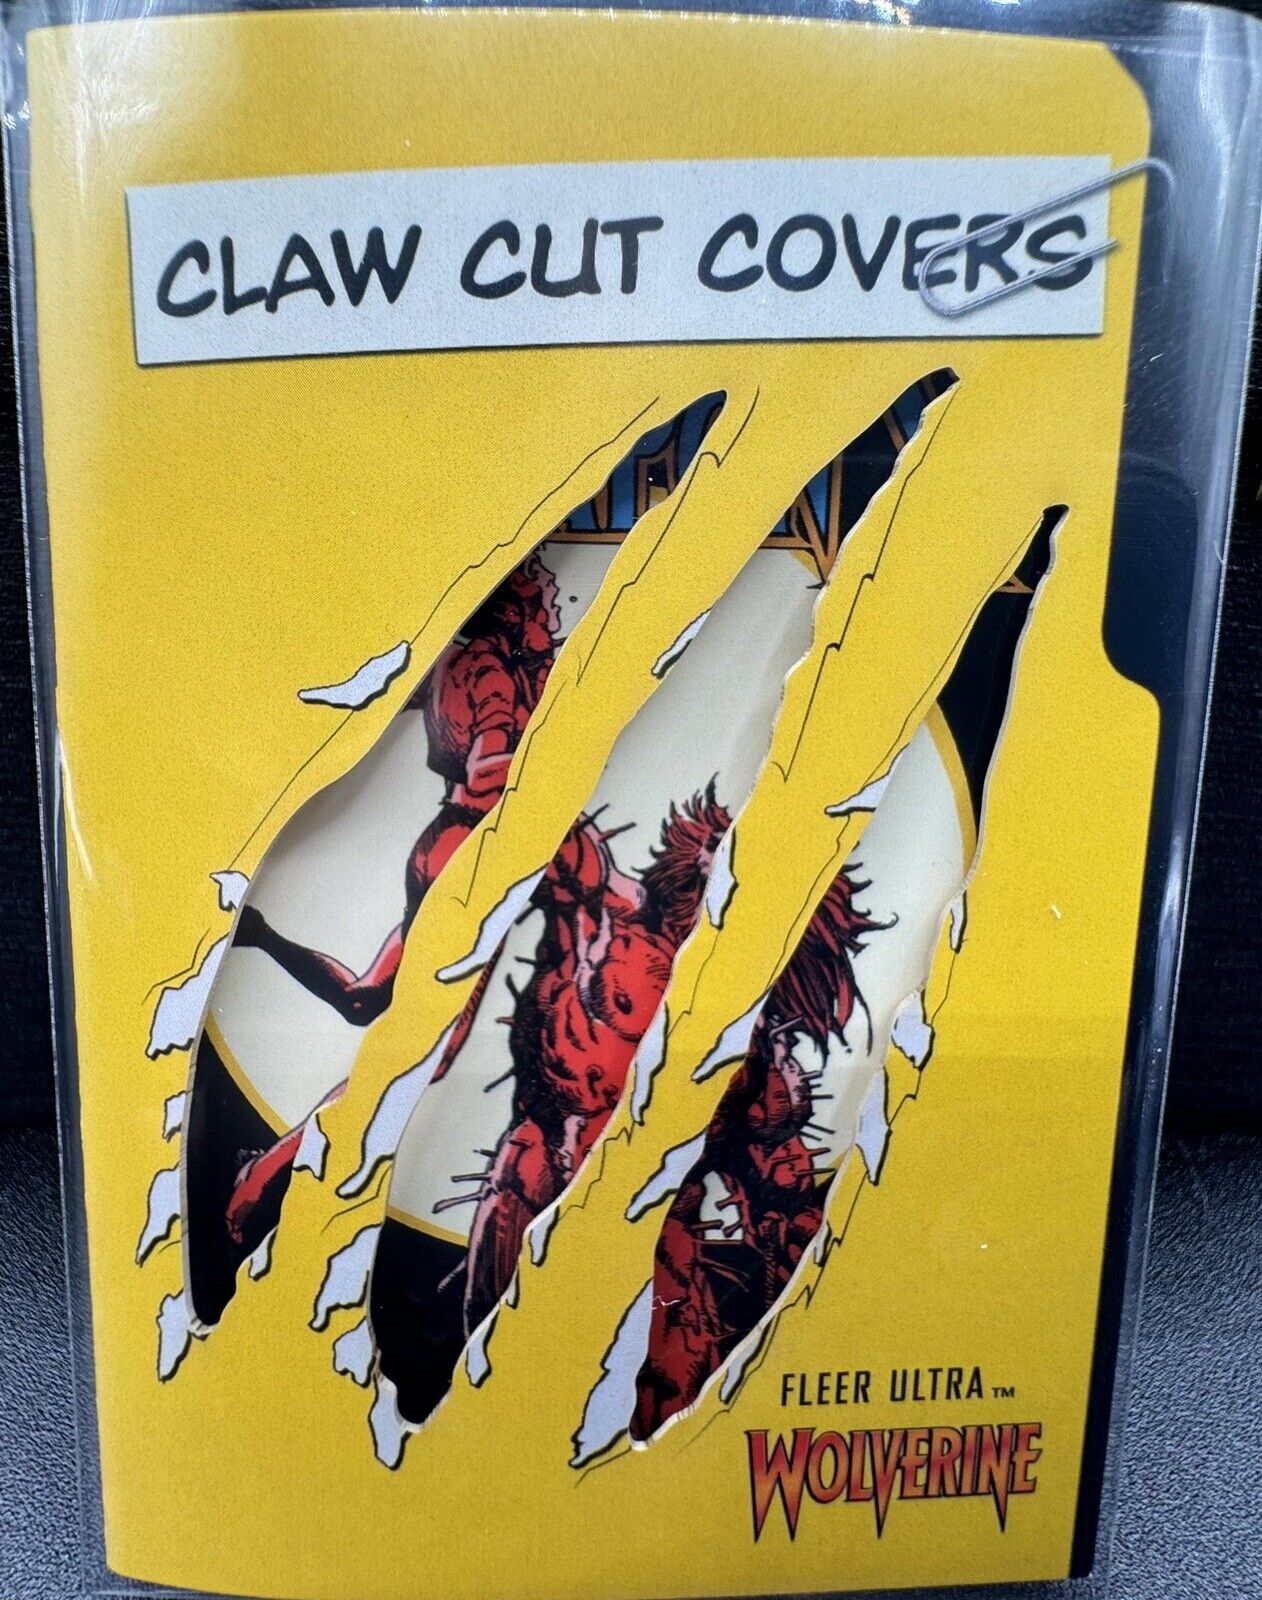 2023 UD Marvel Fleer Ultra Wolverine CLAW CUT COVERS CCC-10 48/50 Only 1 On eBay